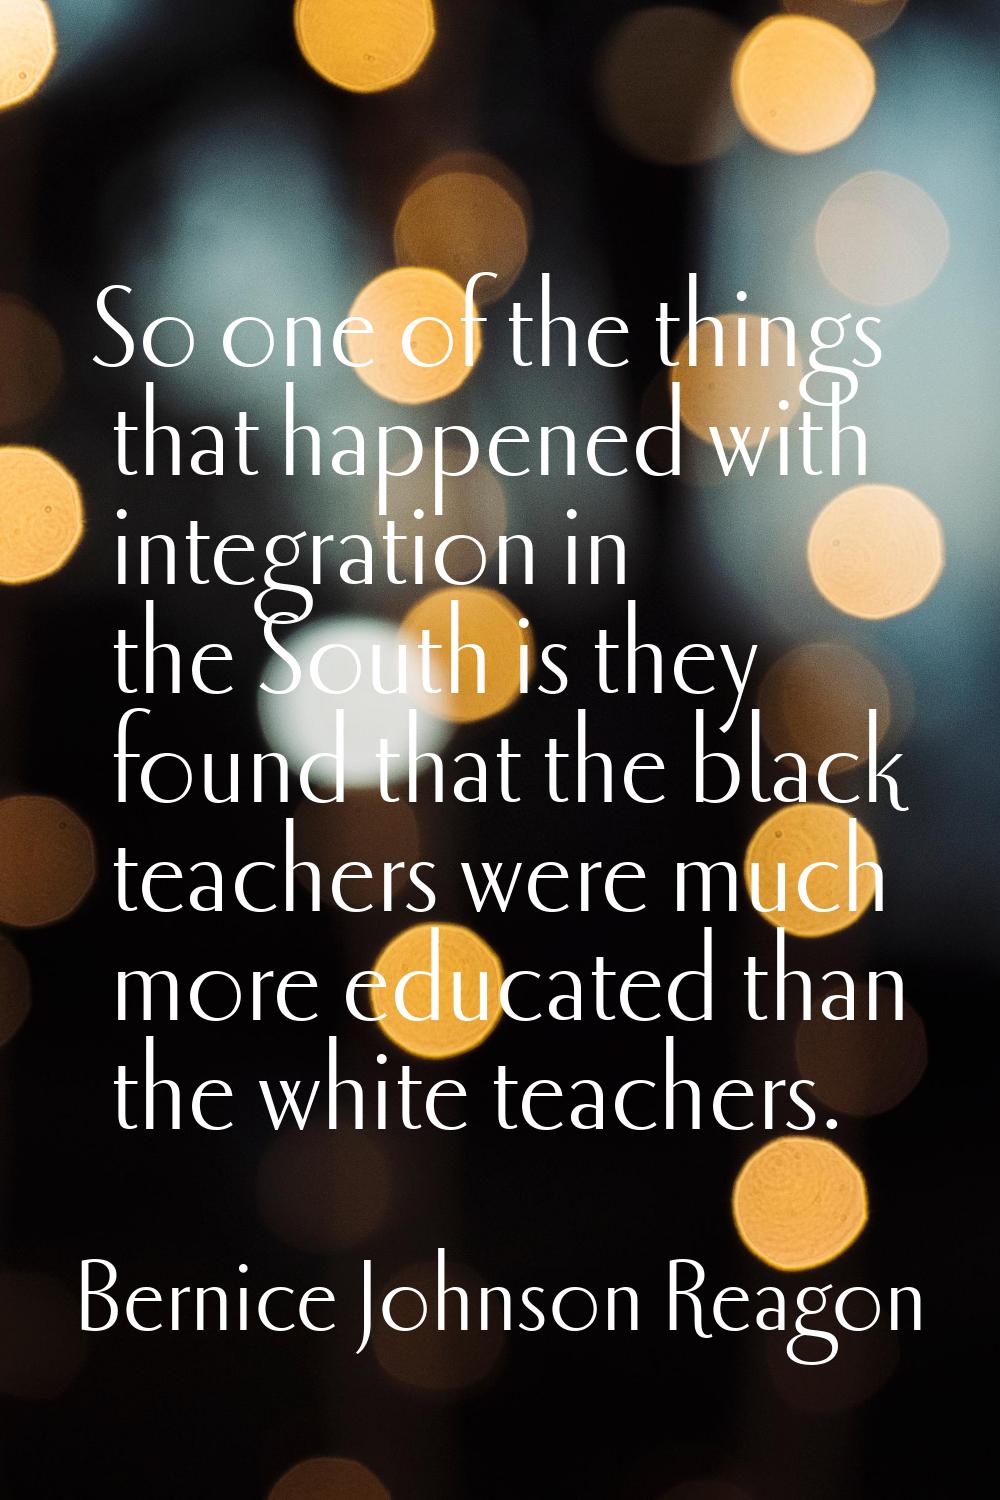 So one of the things that happened with integration in the South is they found that the black teach